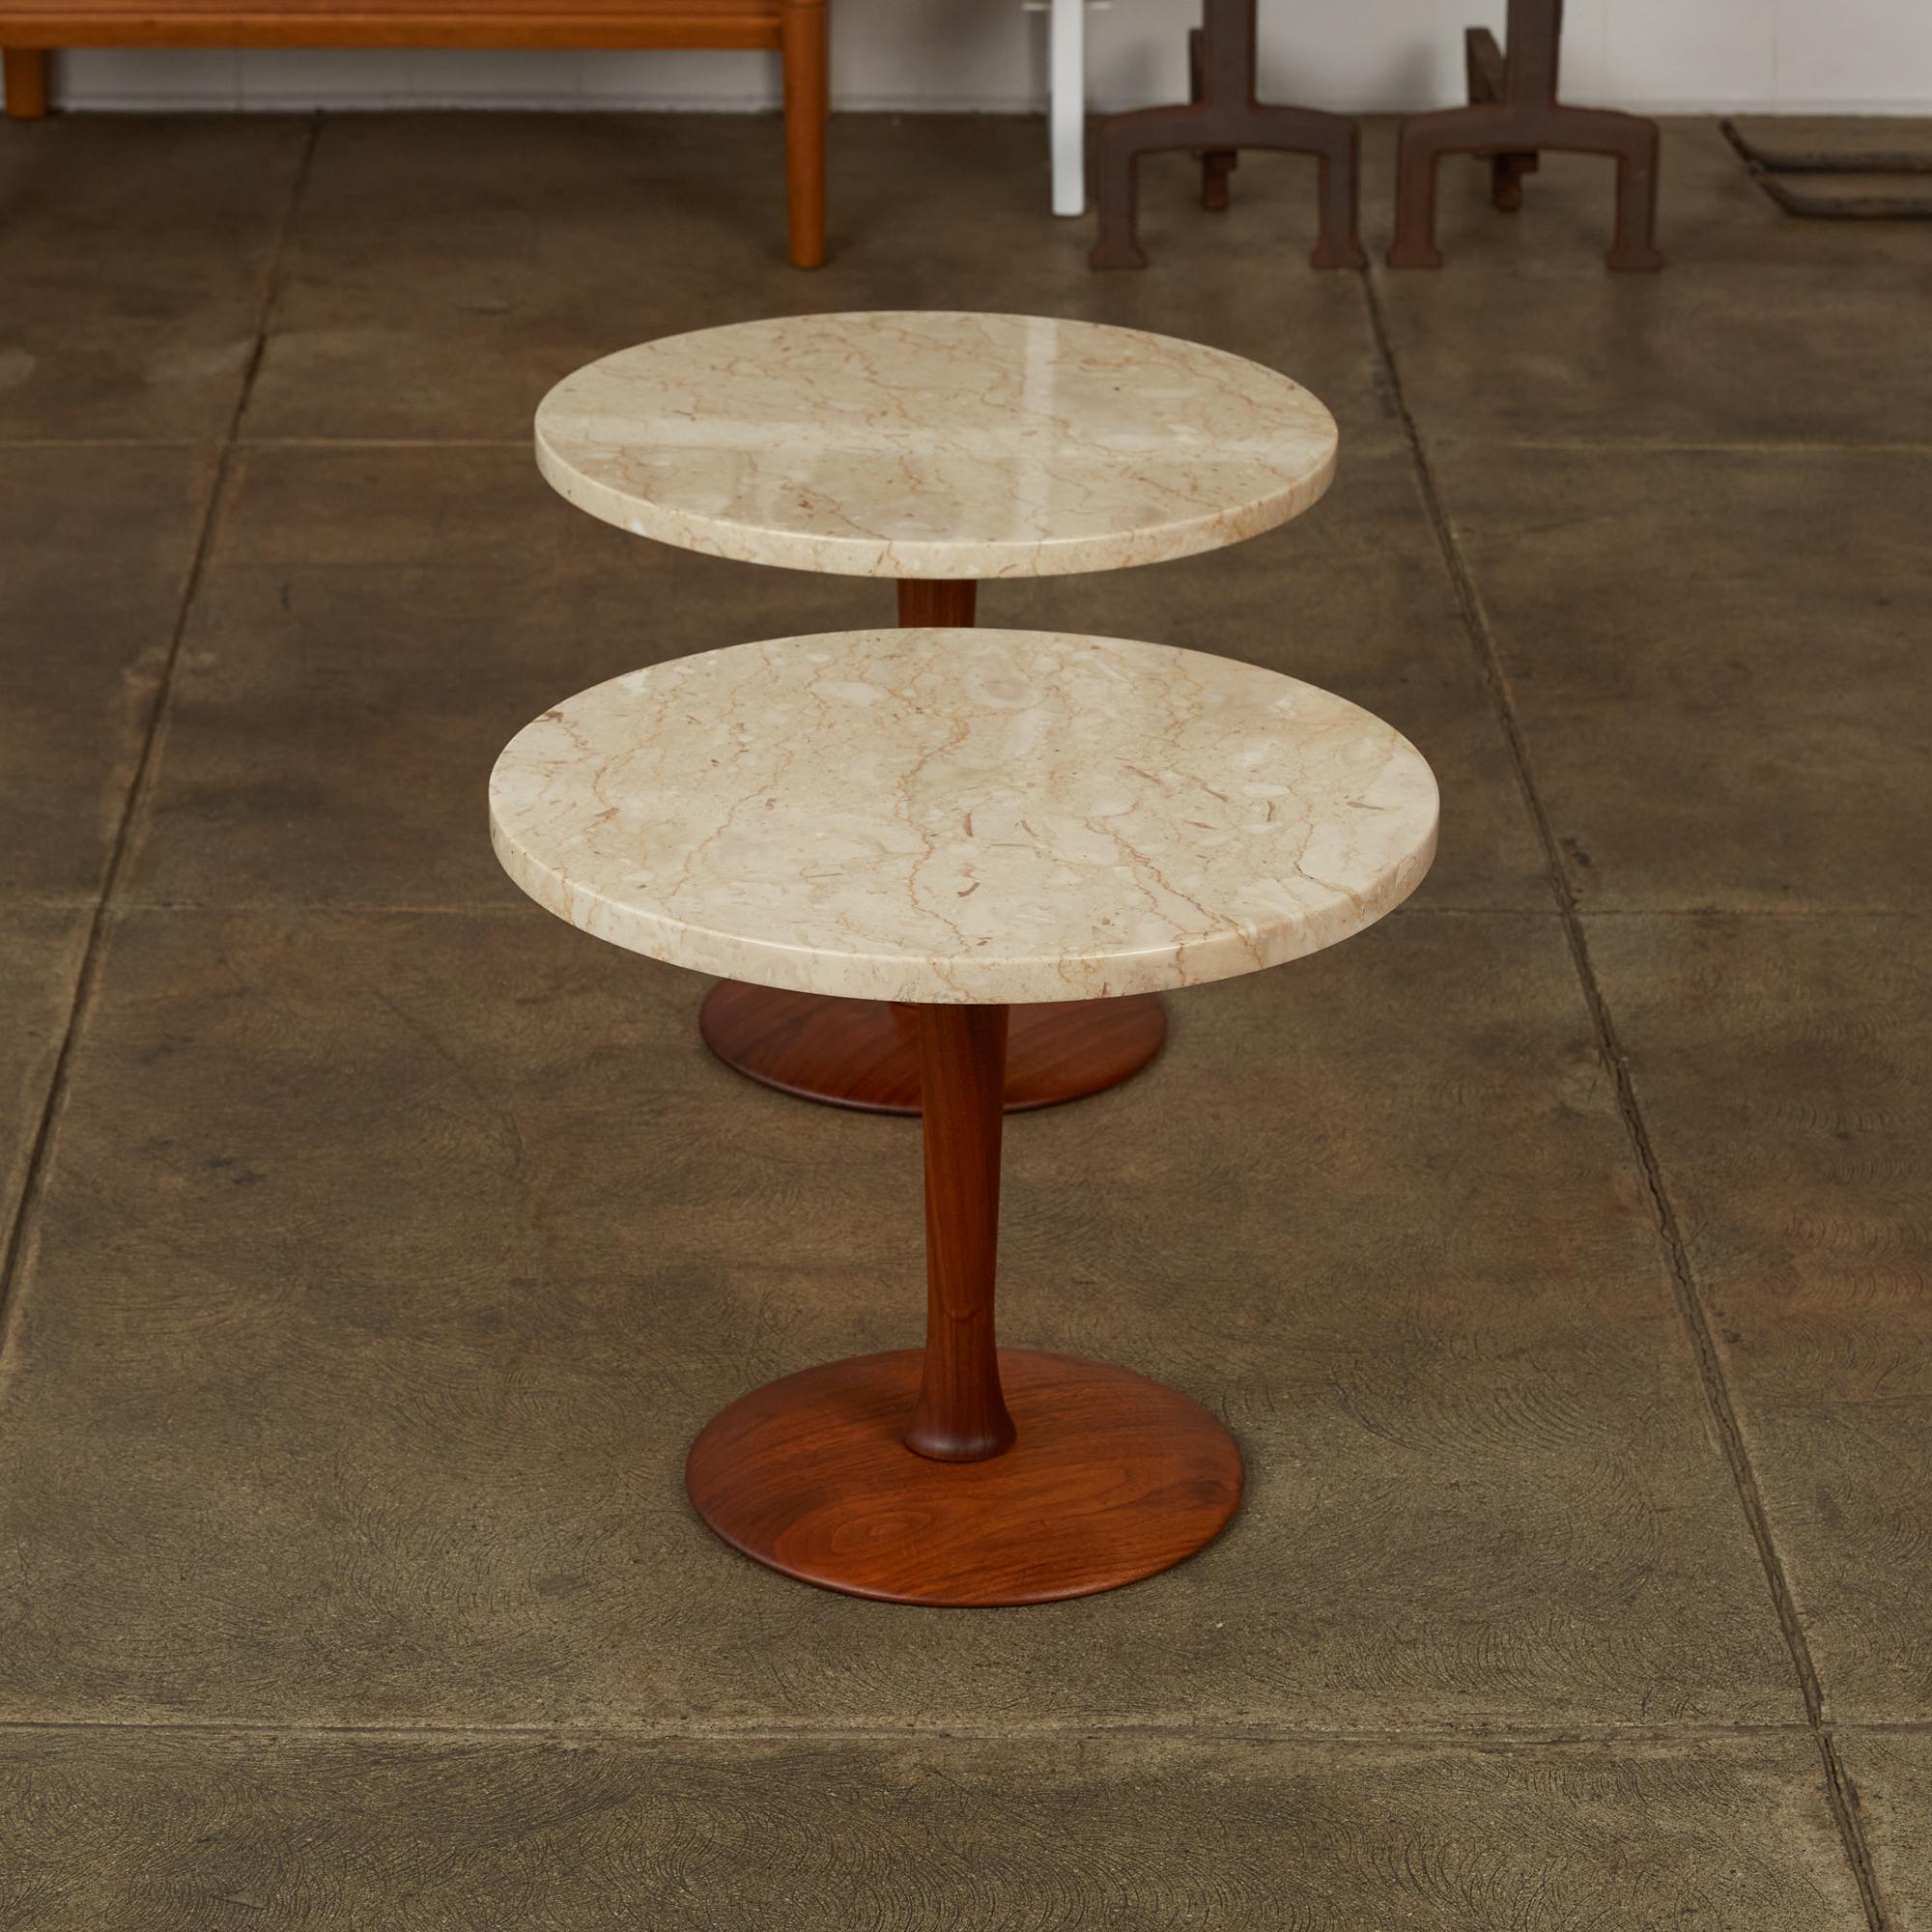 20th Century Pair of Italian Marble Side Tables with Turned Walnut Bases